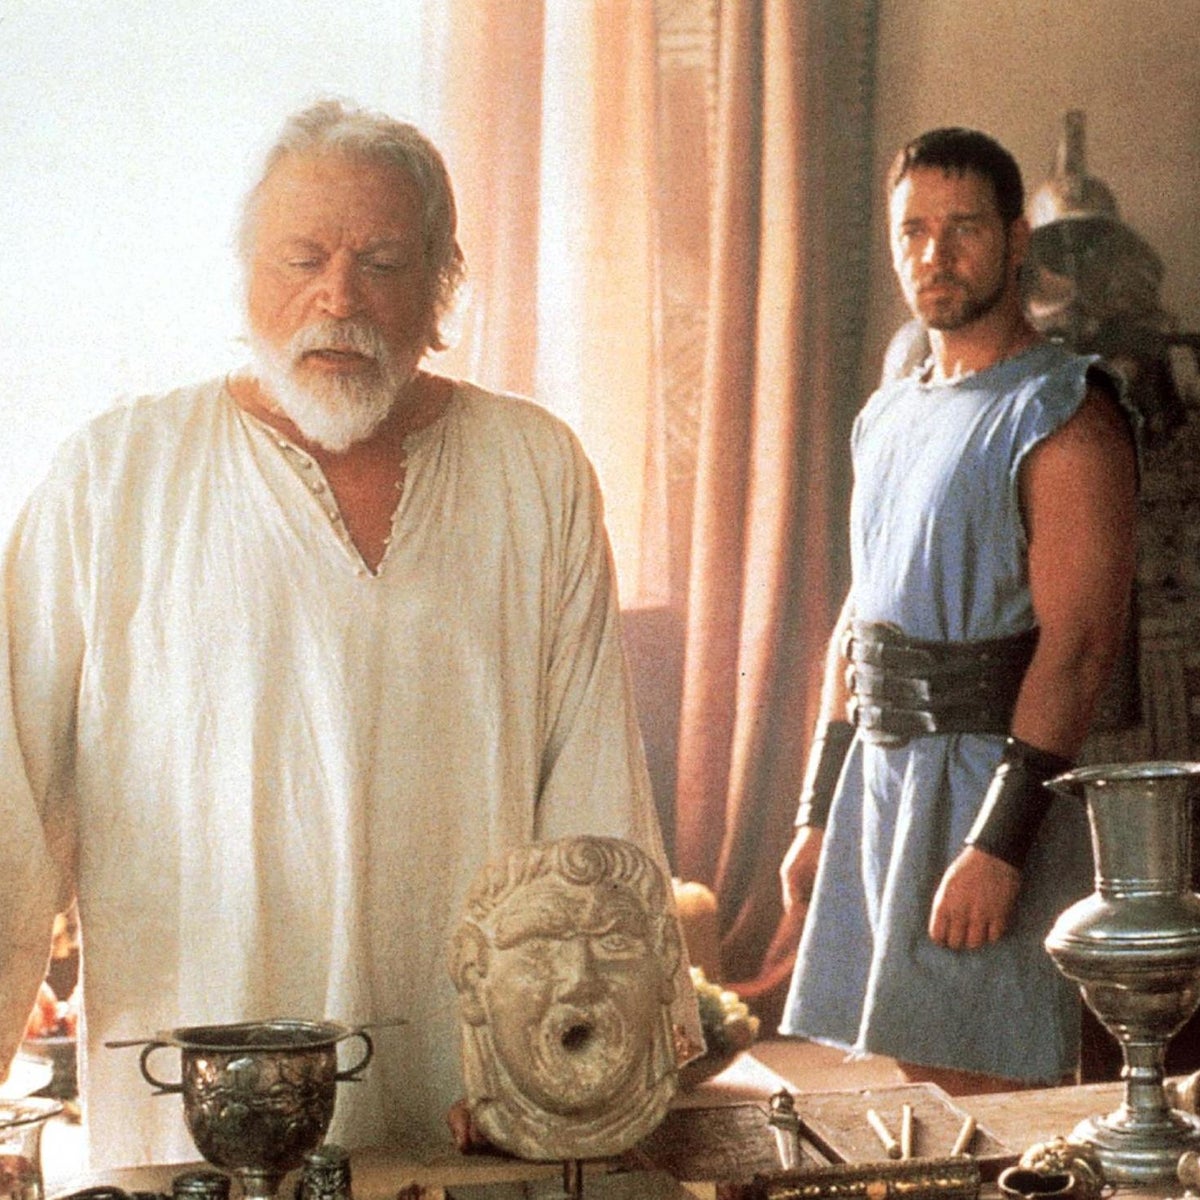 Ridley Scott says Oliver Reed 'dropped down dead' after